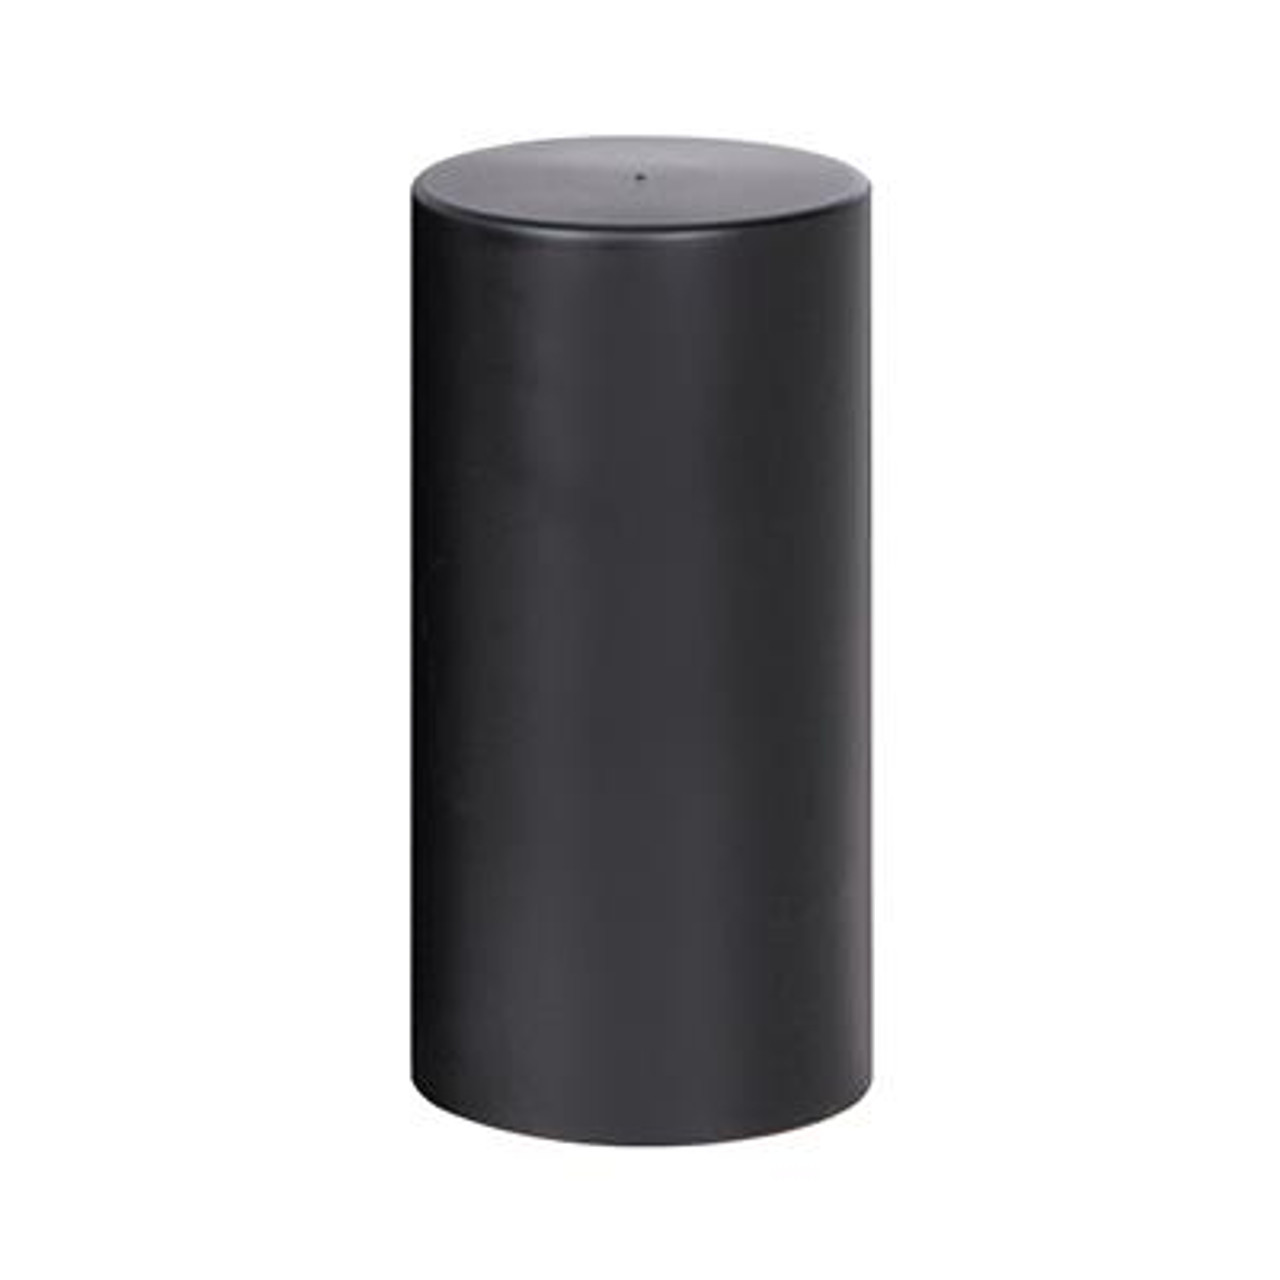 33mm x 4-1/4" Matte Black Tall Cylinder Nut Covers - Thread-On (60-Pack)